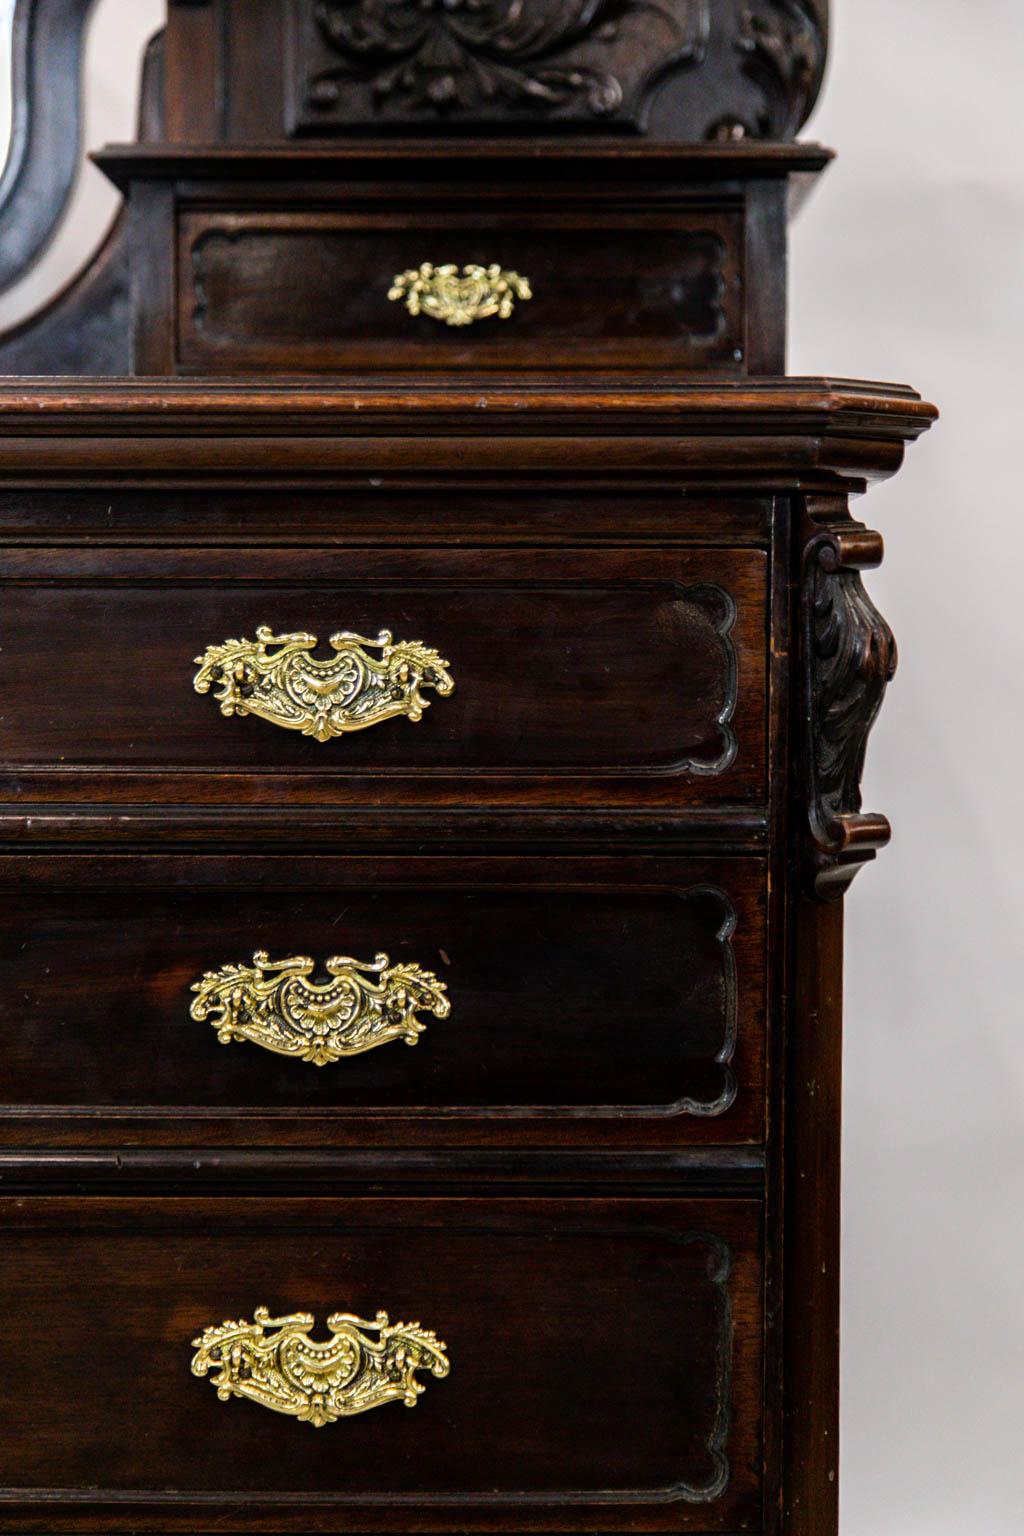 This carved dressing chest is solid mahogany, including the drawer liners. The top has a shaped double mirror framed with carved floral cartouches and an open fretwork broken arch. All hardware is original and has been polished and lacquered for